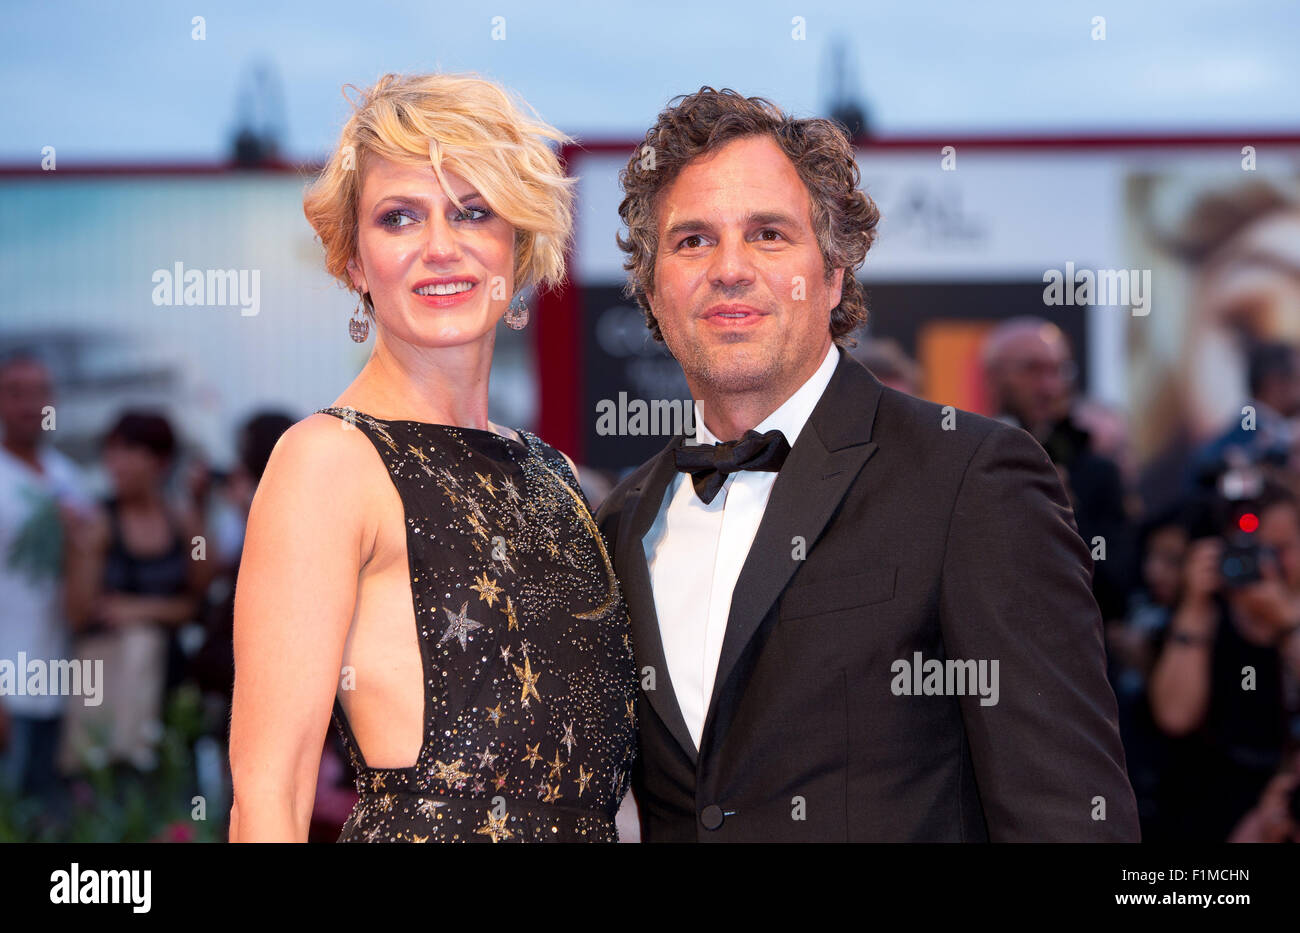 Venice, Italy. 03rd Sep, 2015. Actors Mark Ruffalo and Sunrise Coigney attend the premiere of Spotlight during the opening of the 72nd Venice Film Festival at Palazzo del Cinema in Venice, Italy, on 03 September 2015. Photo: Hubert Boesl /dpa - NO WIRE SERVICE - Credit:  dpa picture alliance/Alamy Live News Stock Photo